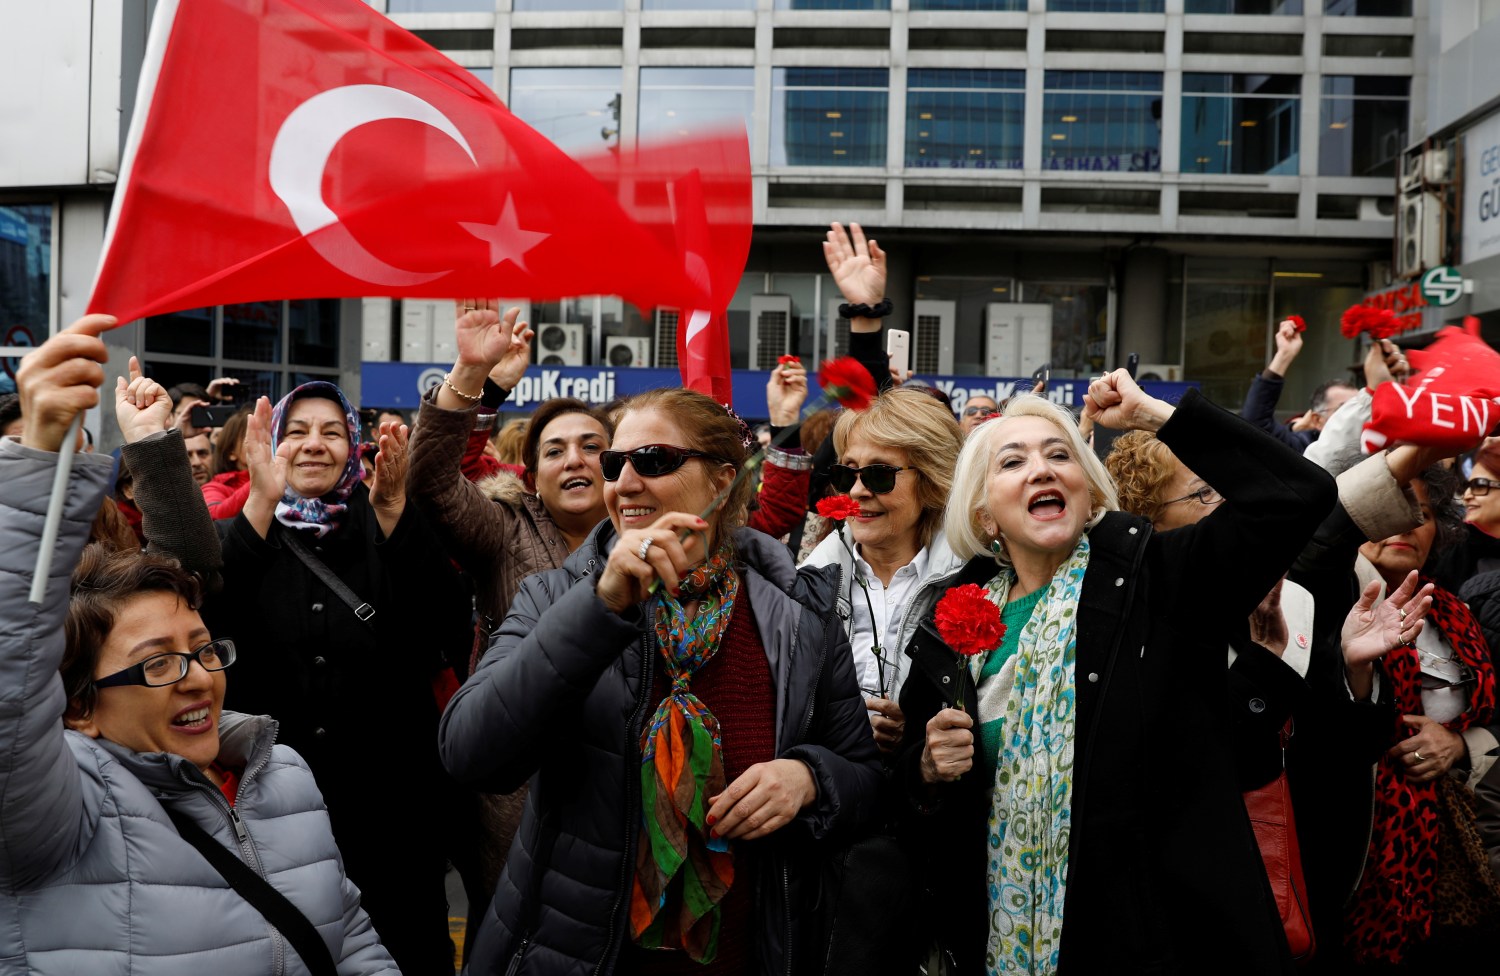 Supporters of Republican People's Party (CHP) celebrate on a main square in Ankara, Turkey, April 1, 2019. REUTERS/Umit Bektas - RC1DFFF7A1F0